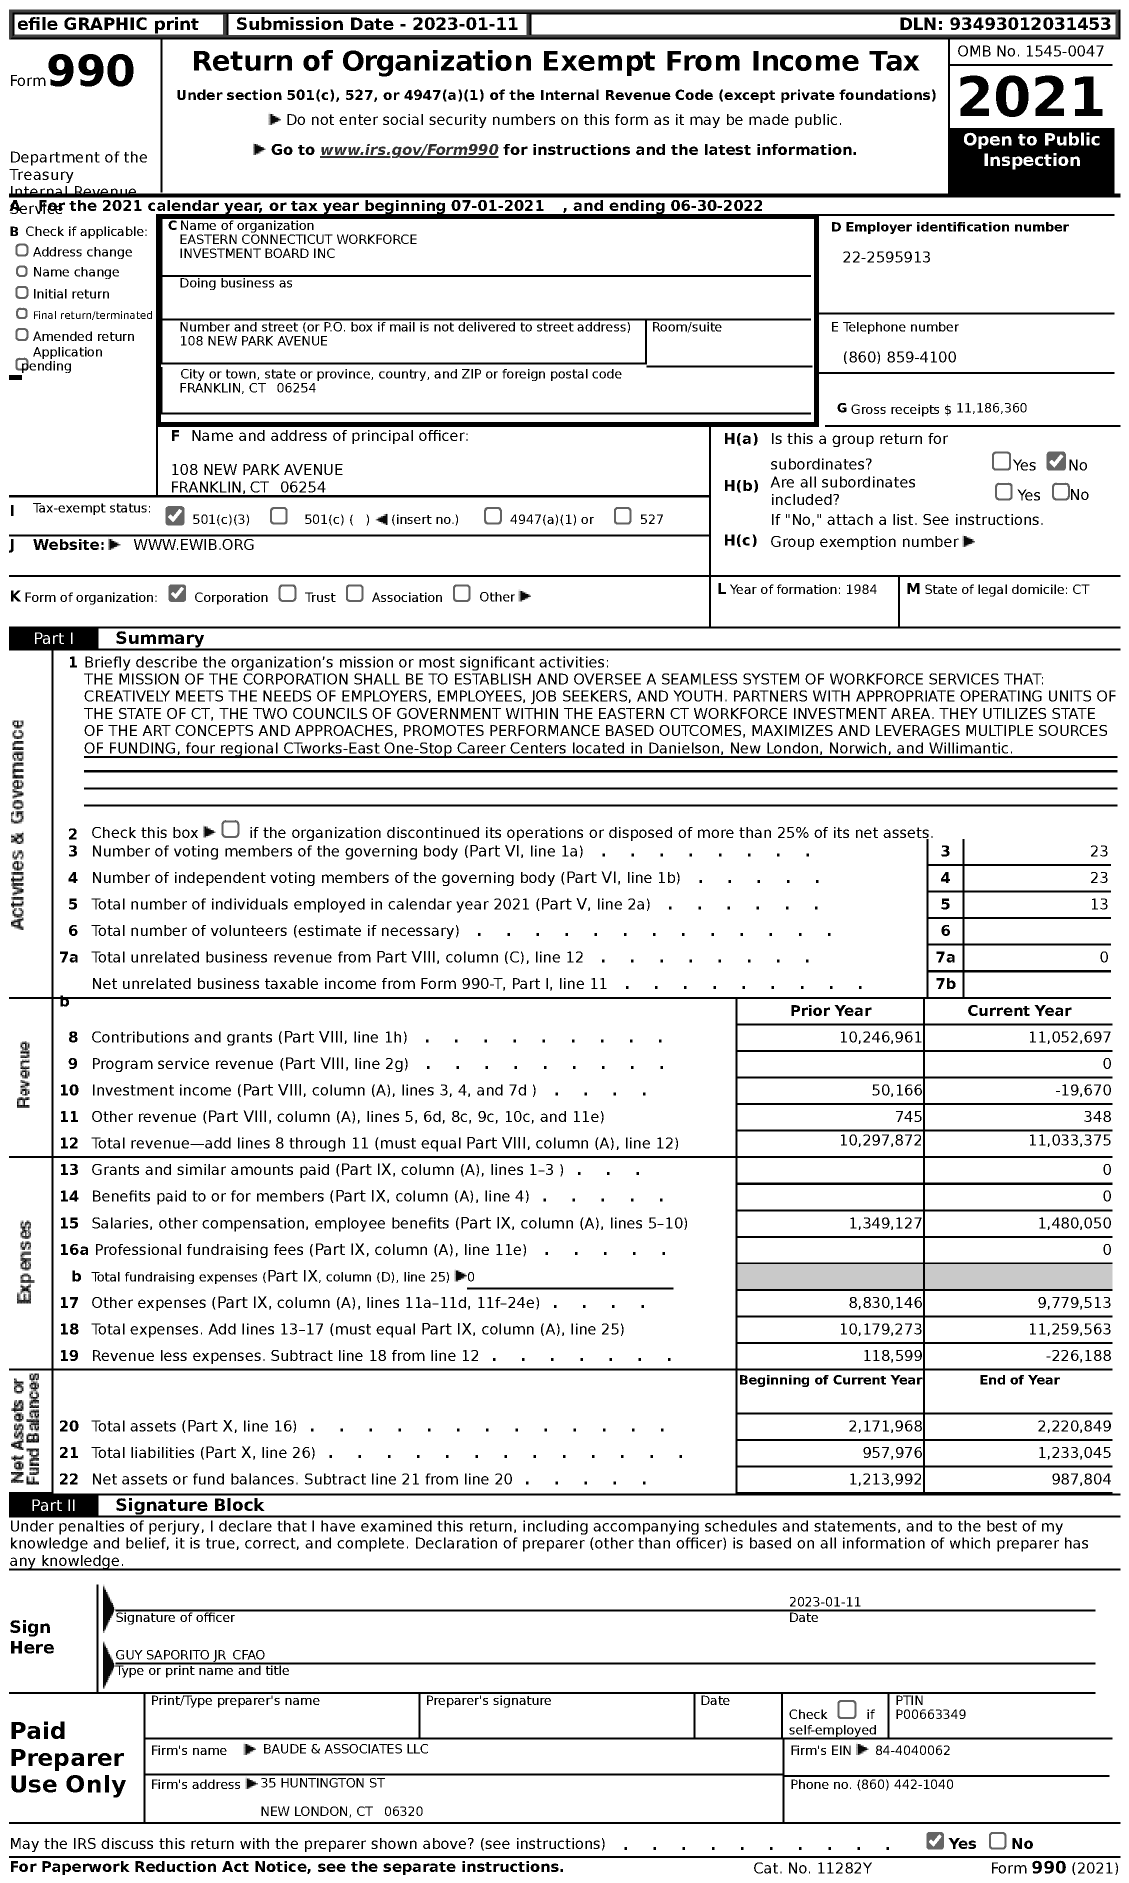 Image of first page of 2021 Form 990 for Eastern Connecticut Workforce Investment Board (EWIB)